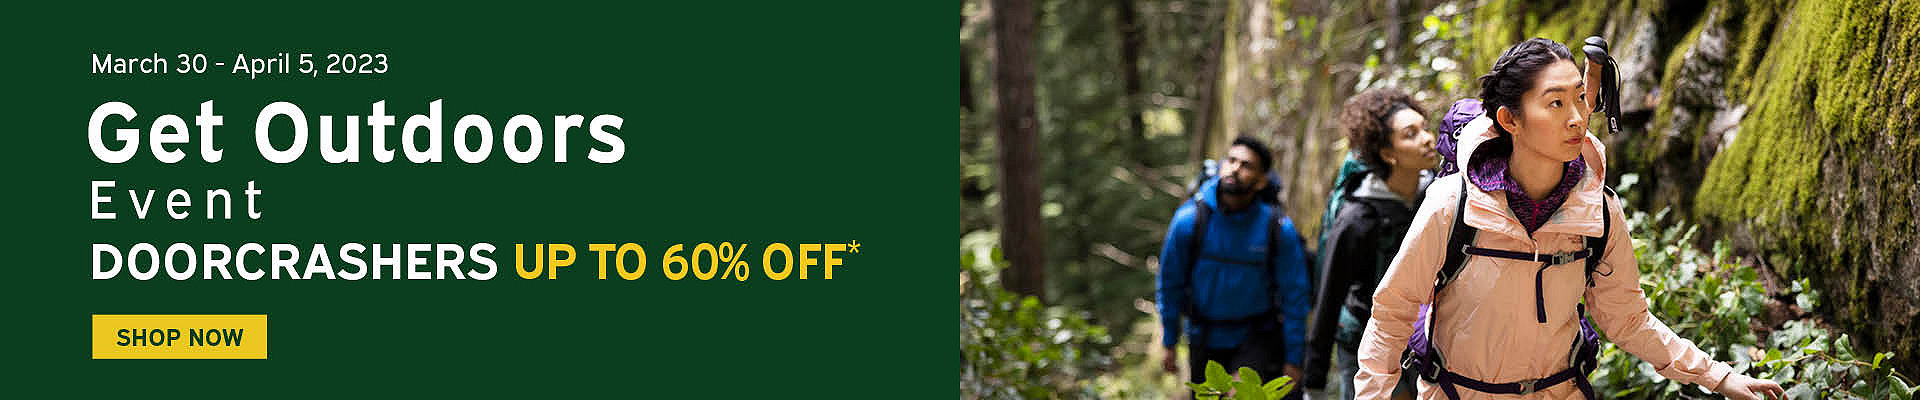 Get Outdoors Event - Doorcrashers up to 60% Off* Our regular price. Select brands & styles. Shop now.